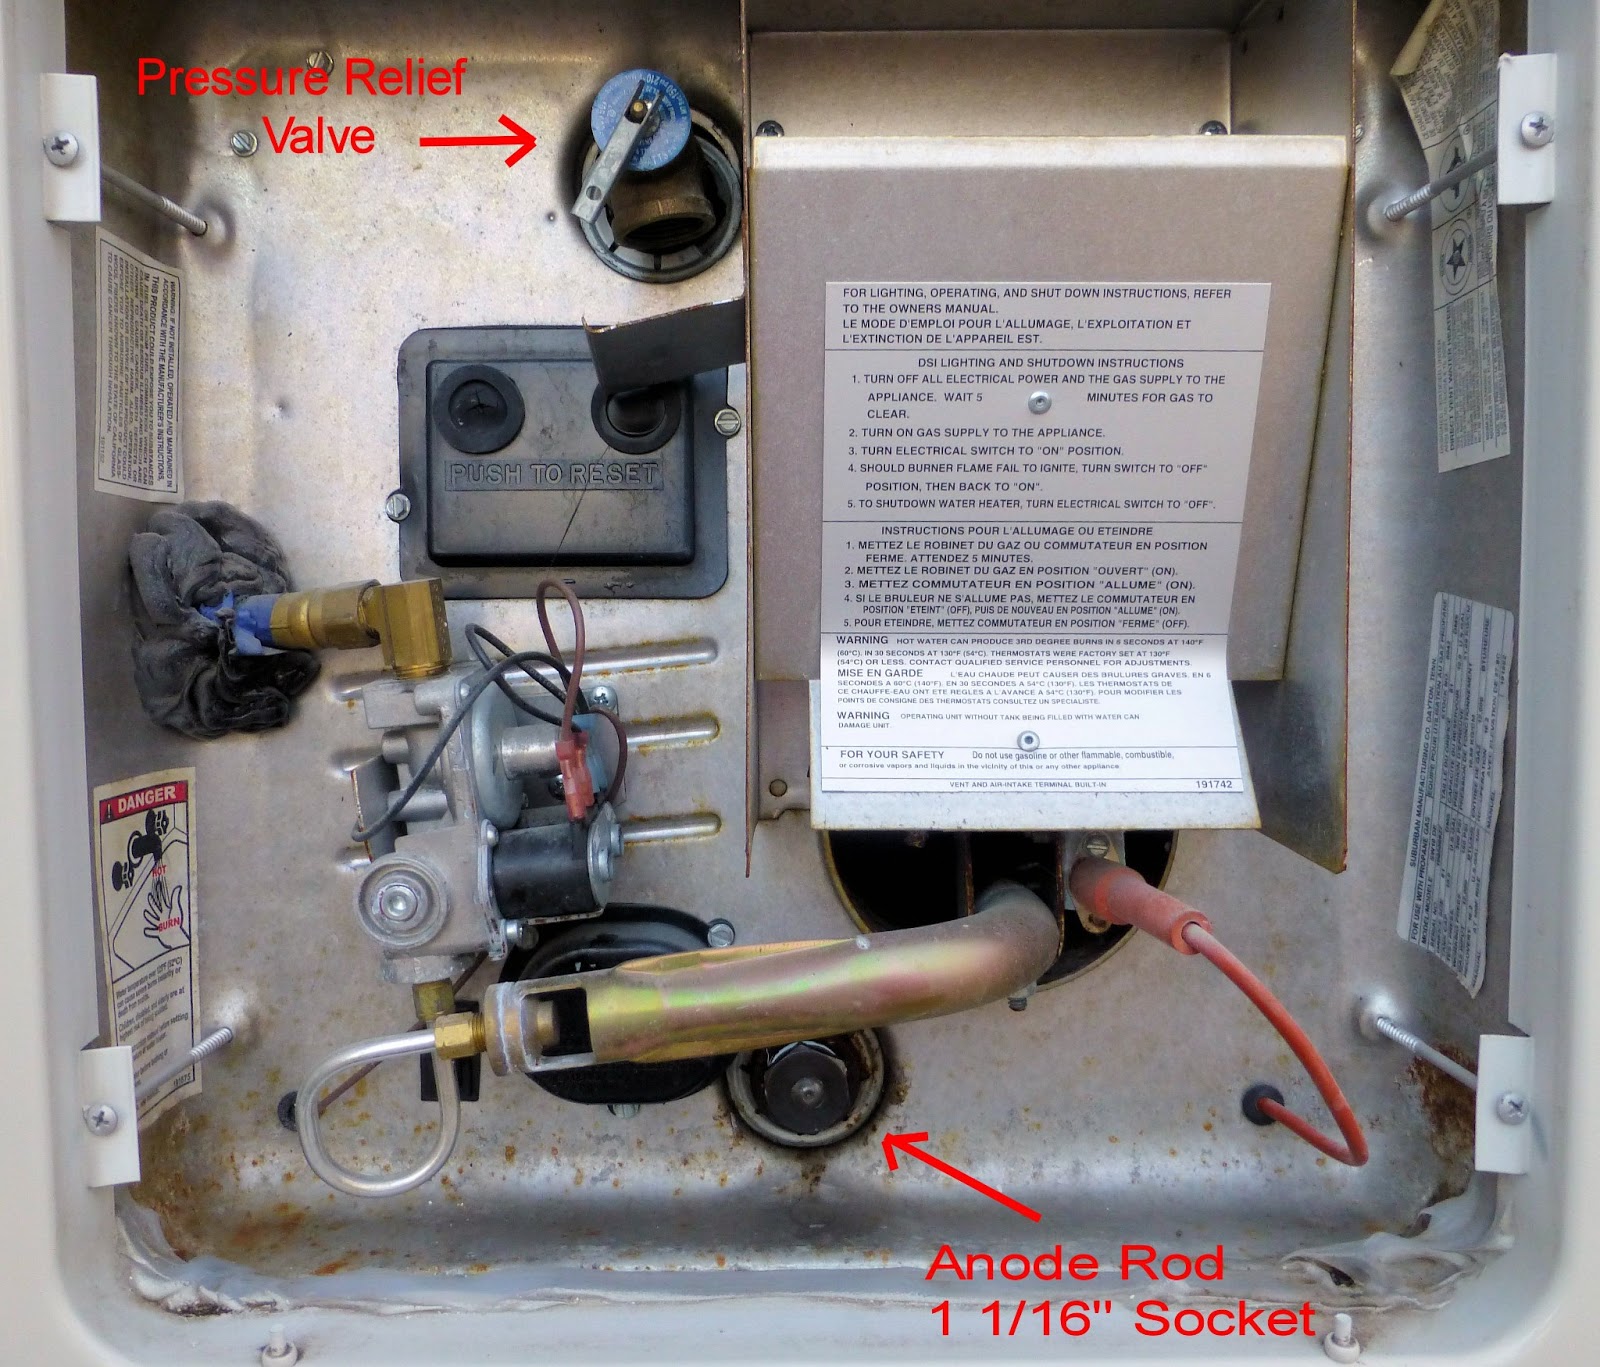 How to empty the hot water tank - Forest River Forums Forest River Water Heater Anode Rod